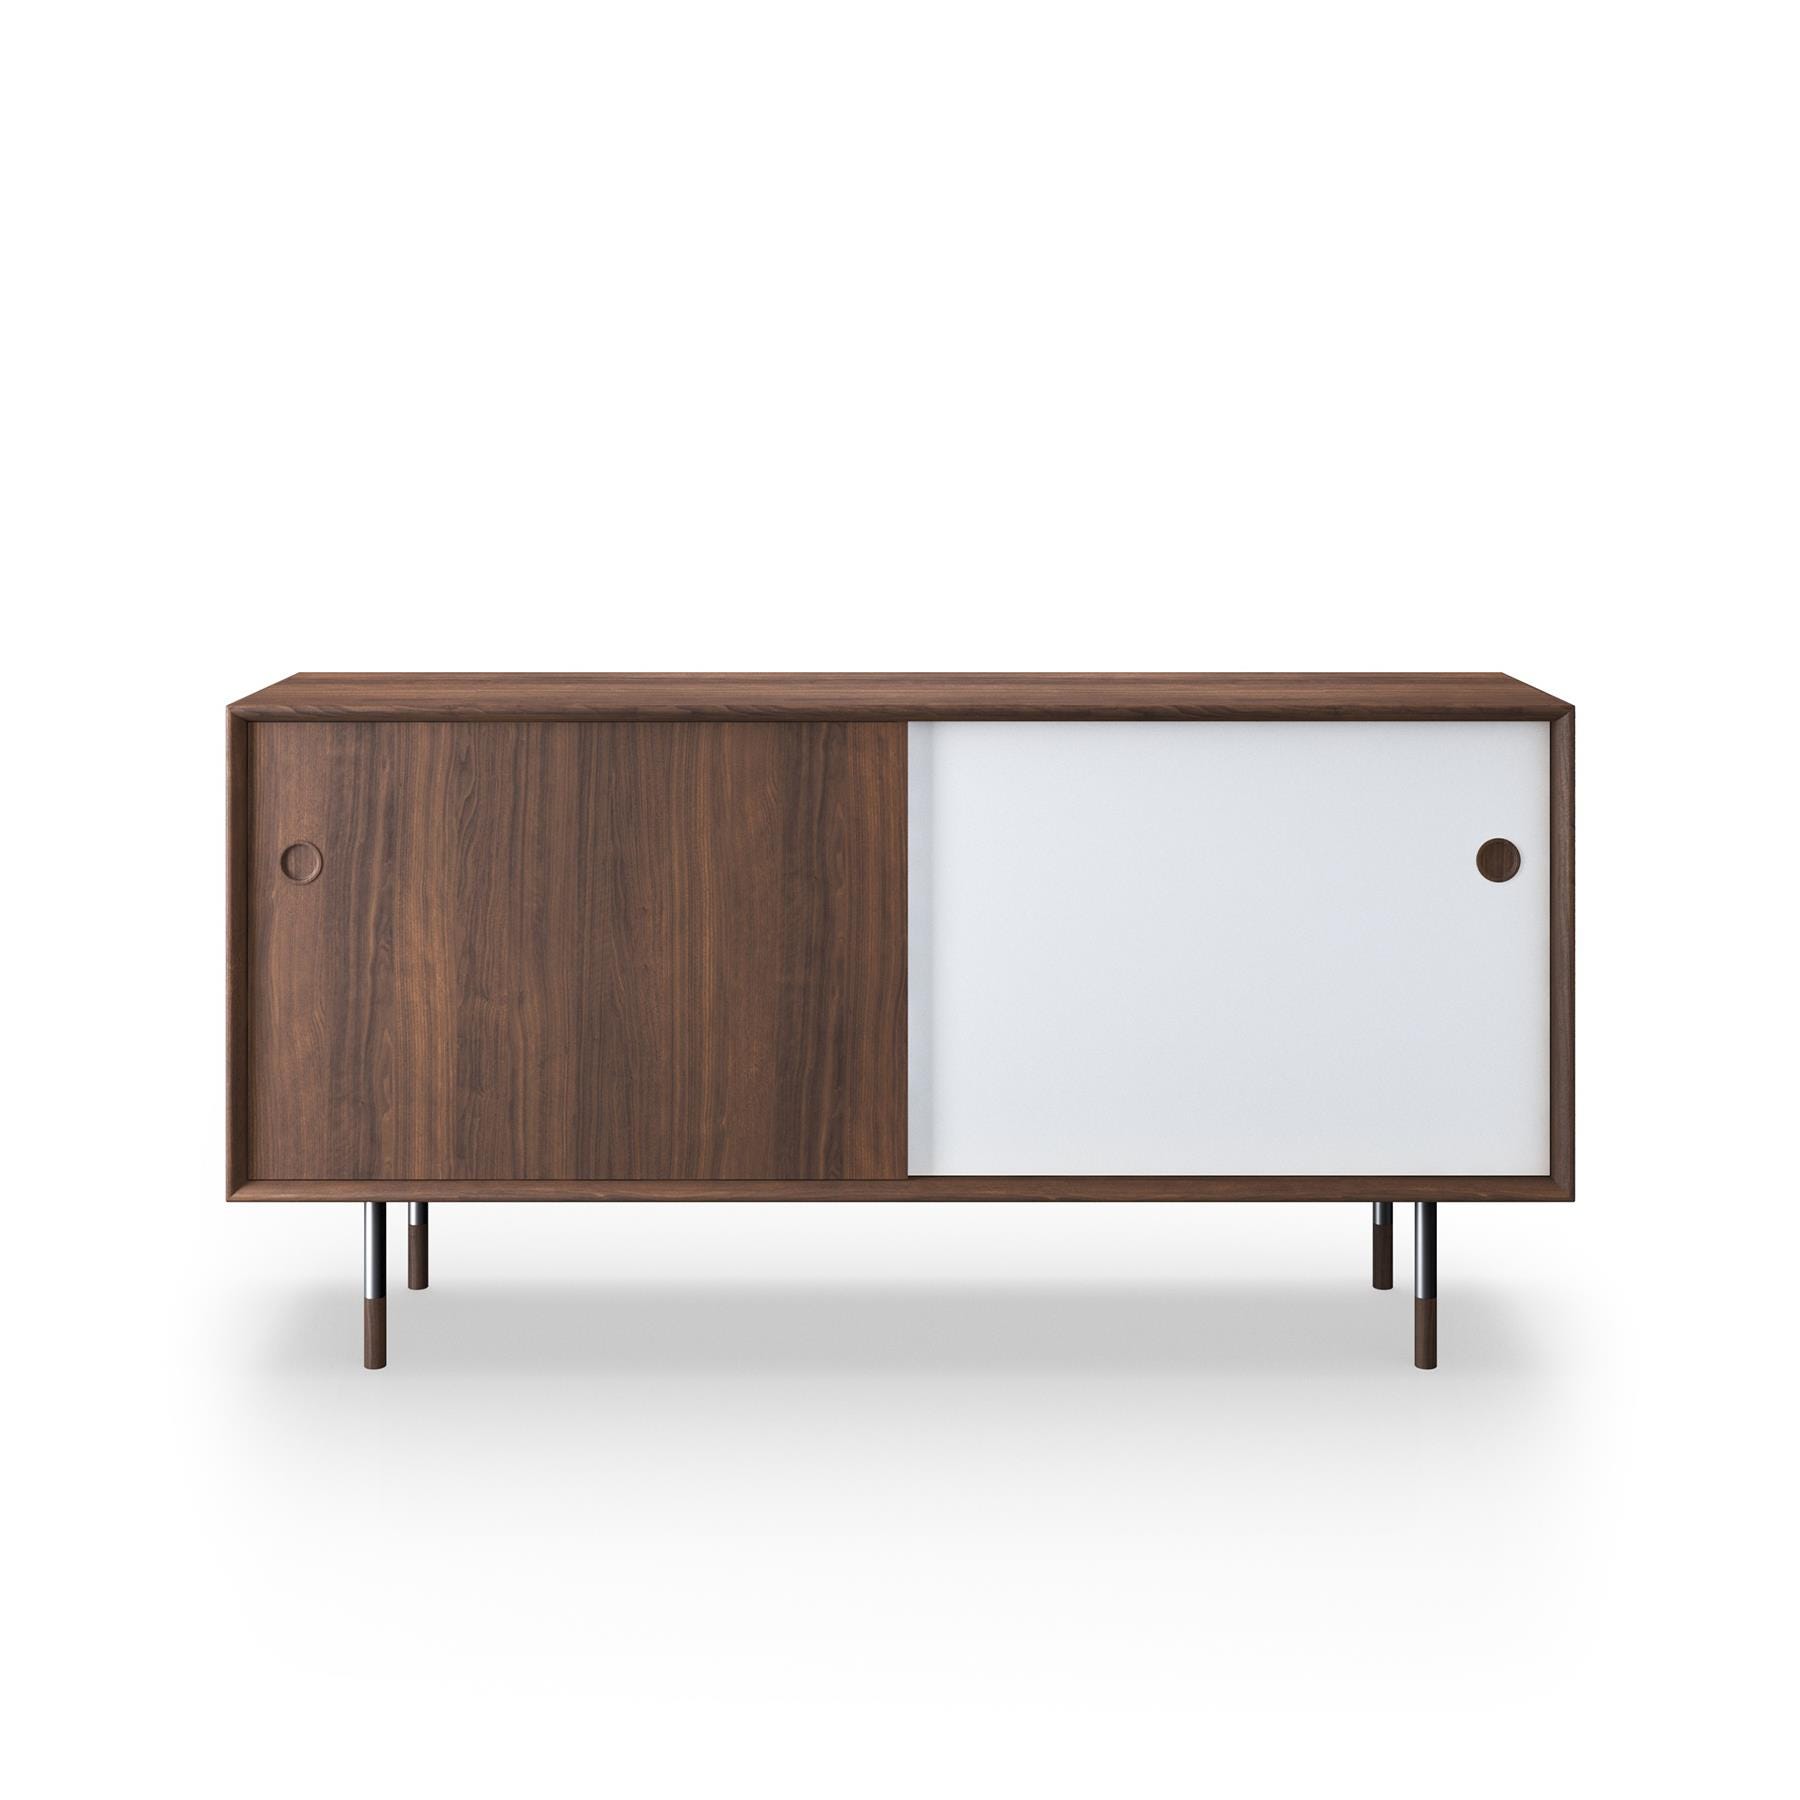 Sibast No 11 Sideboard Walnut White And Natural Front Metal Legs Dark Wood Designer Furniture From Holloways Of Ludlow